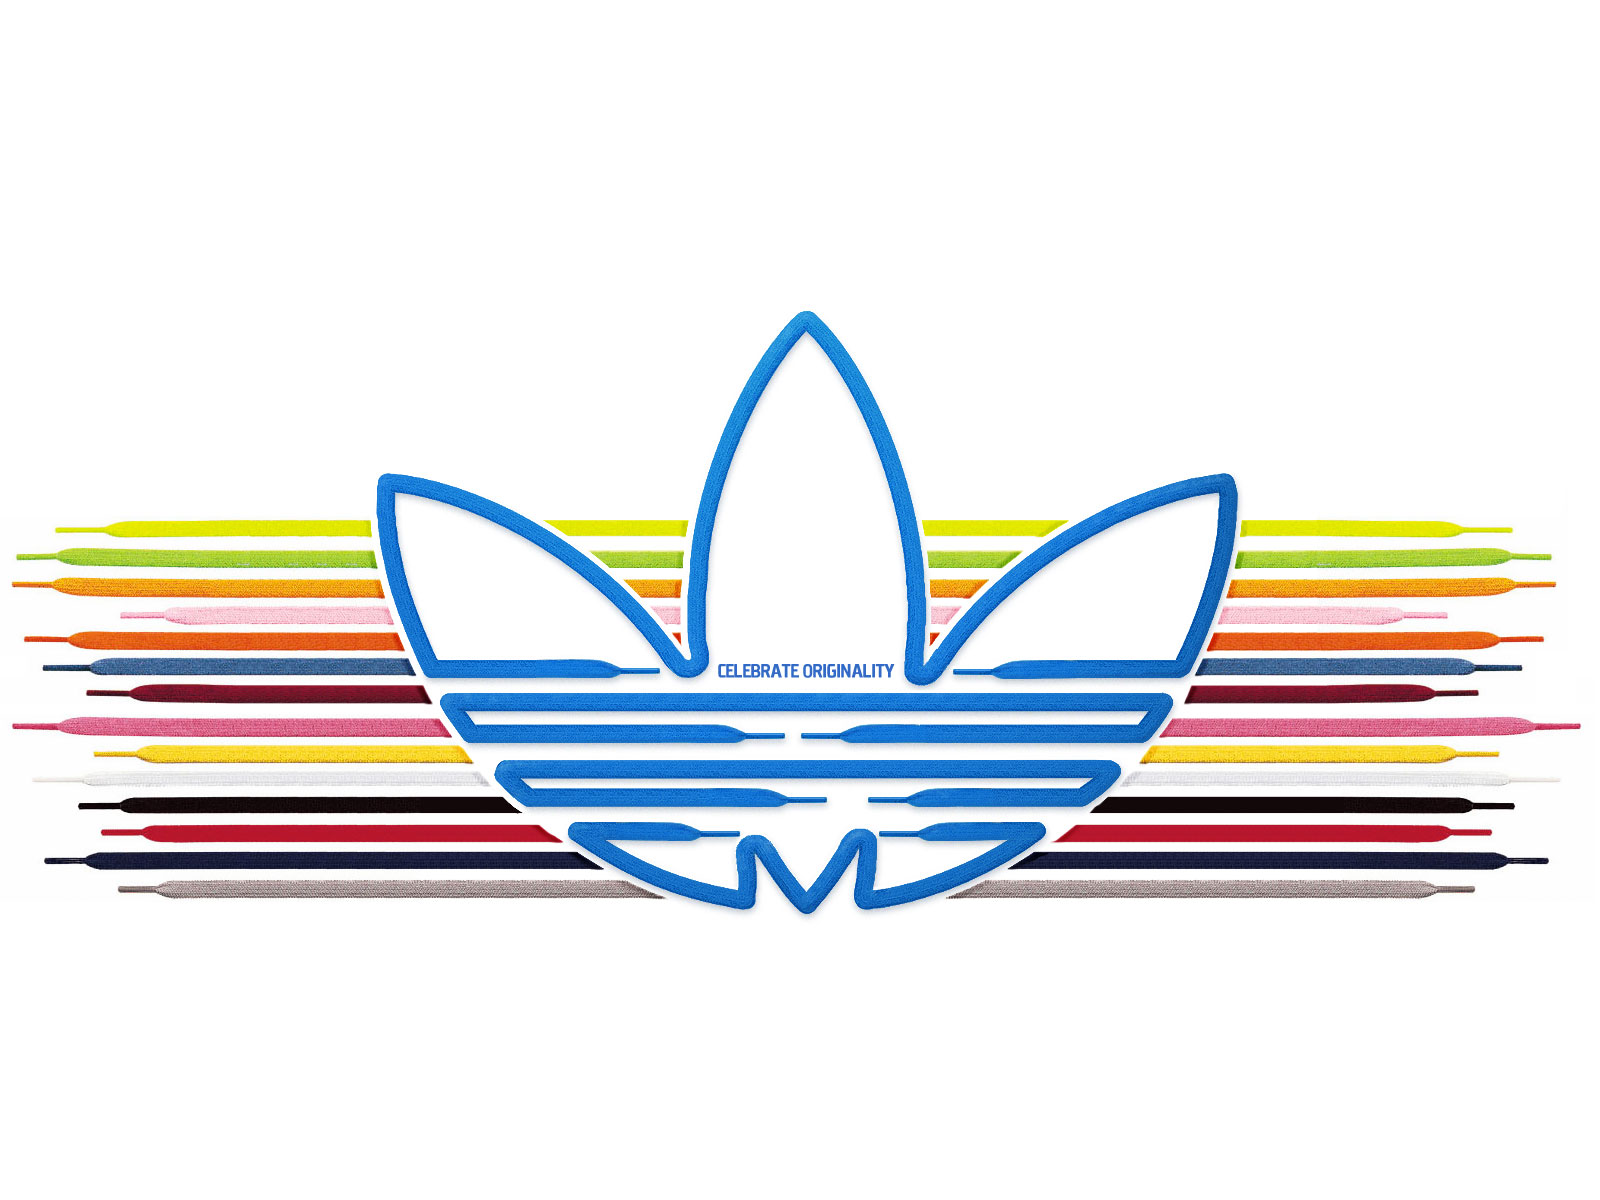 Adidas Logo HD Wallpapers Download Free Wallpapers in HD for your